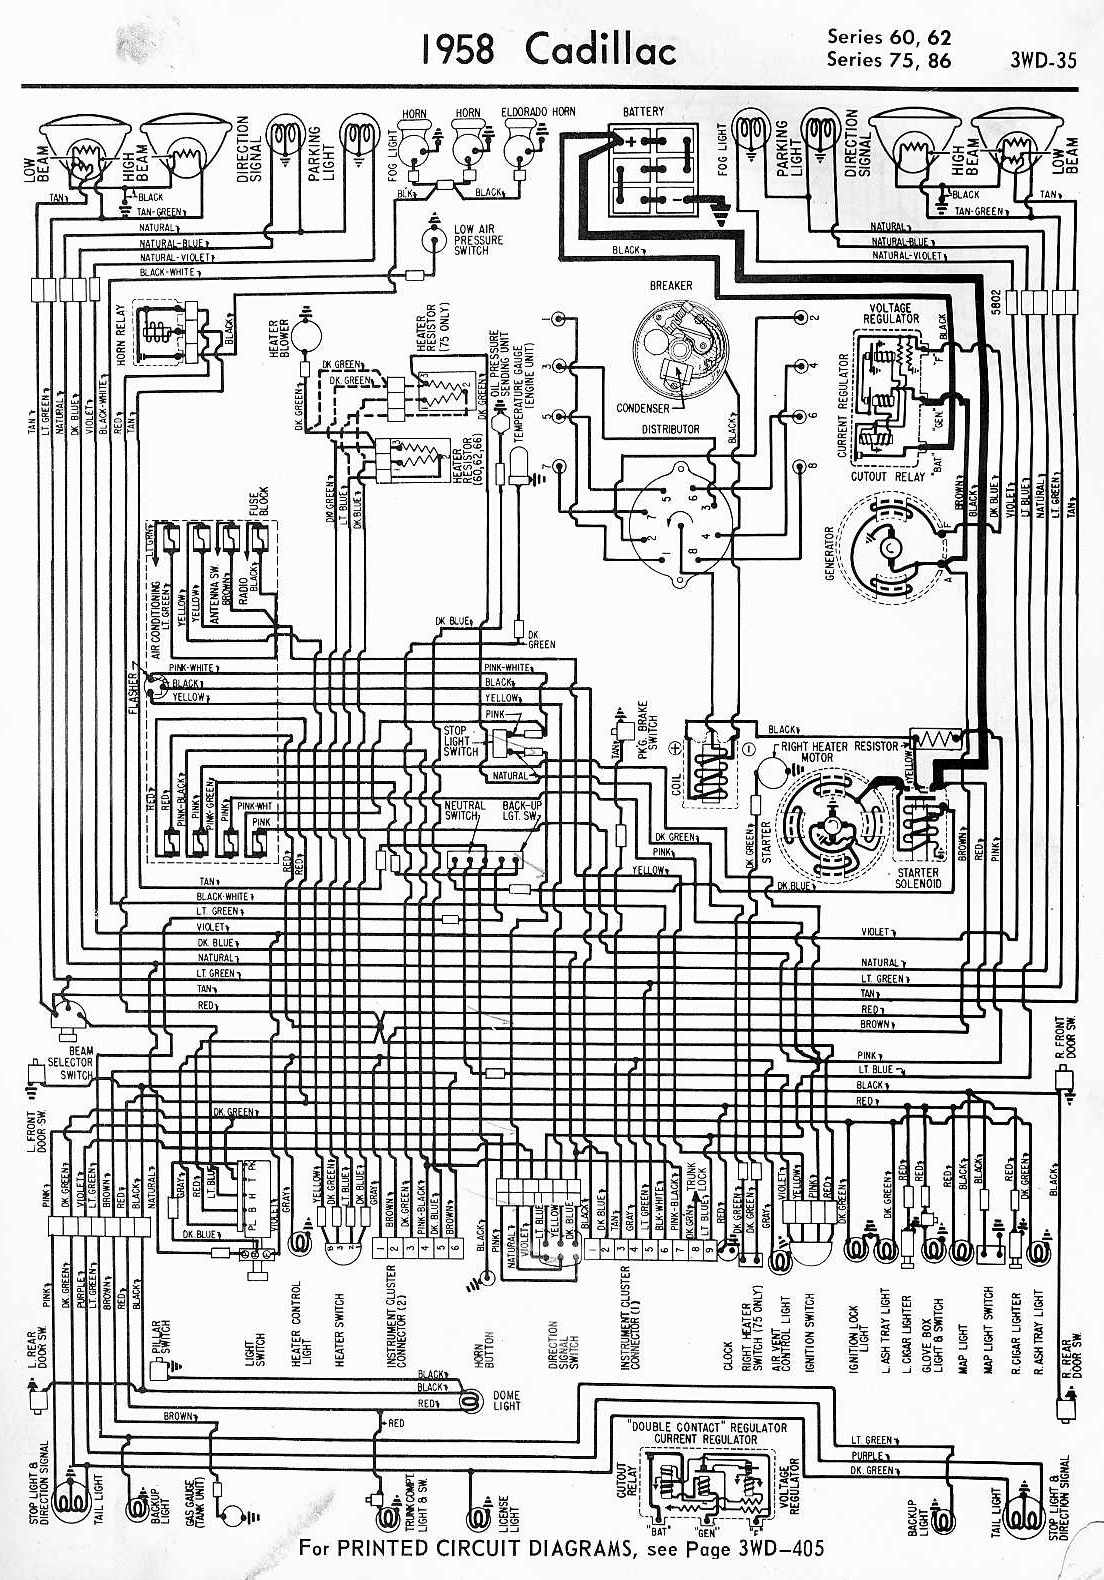 1999 Cadillac Deville Radio Wiring Diagram from www.automotive-manuals.net